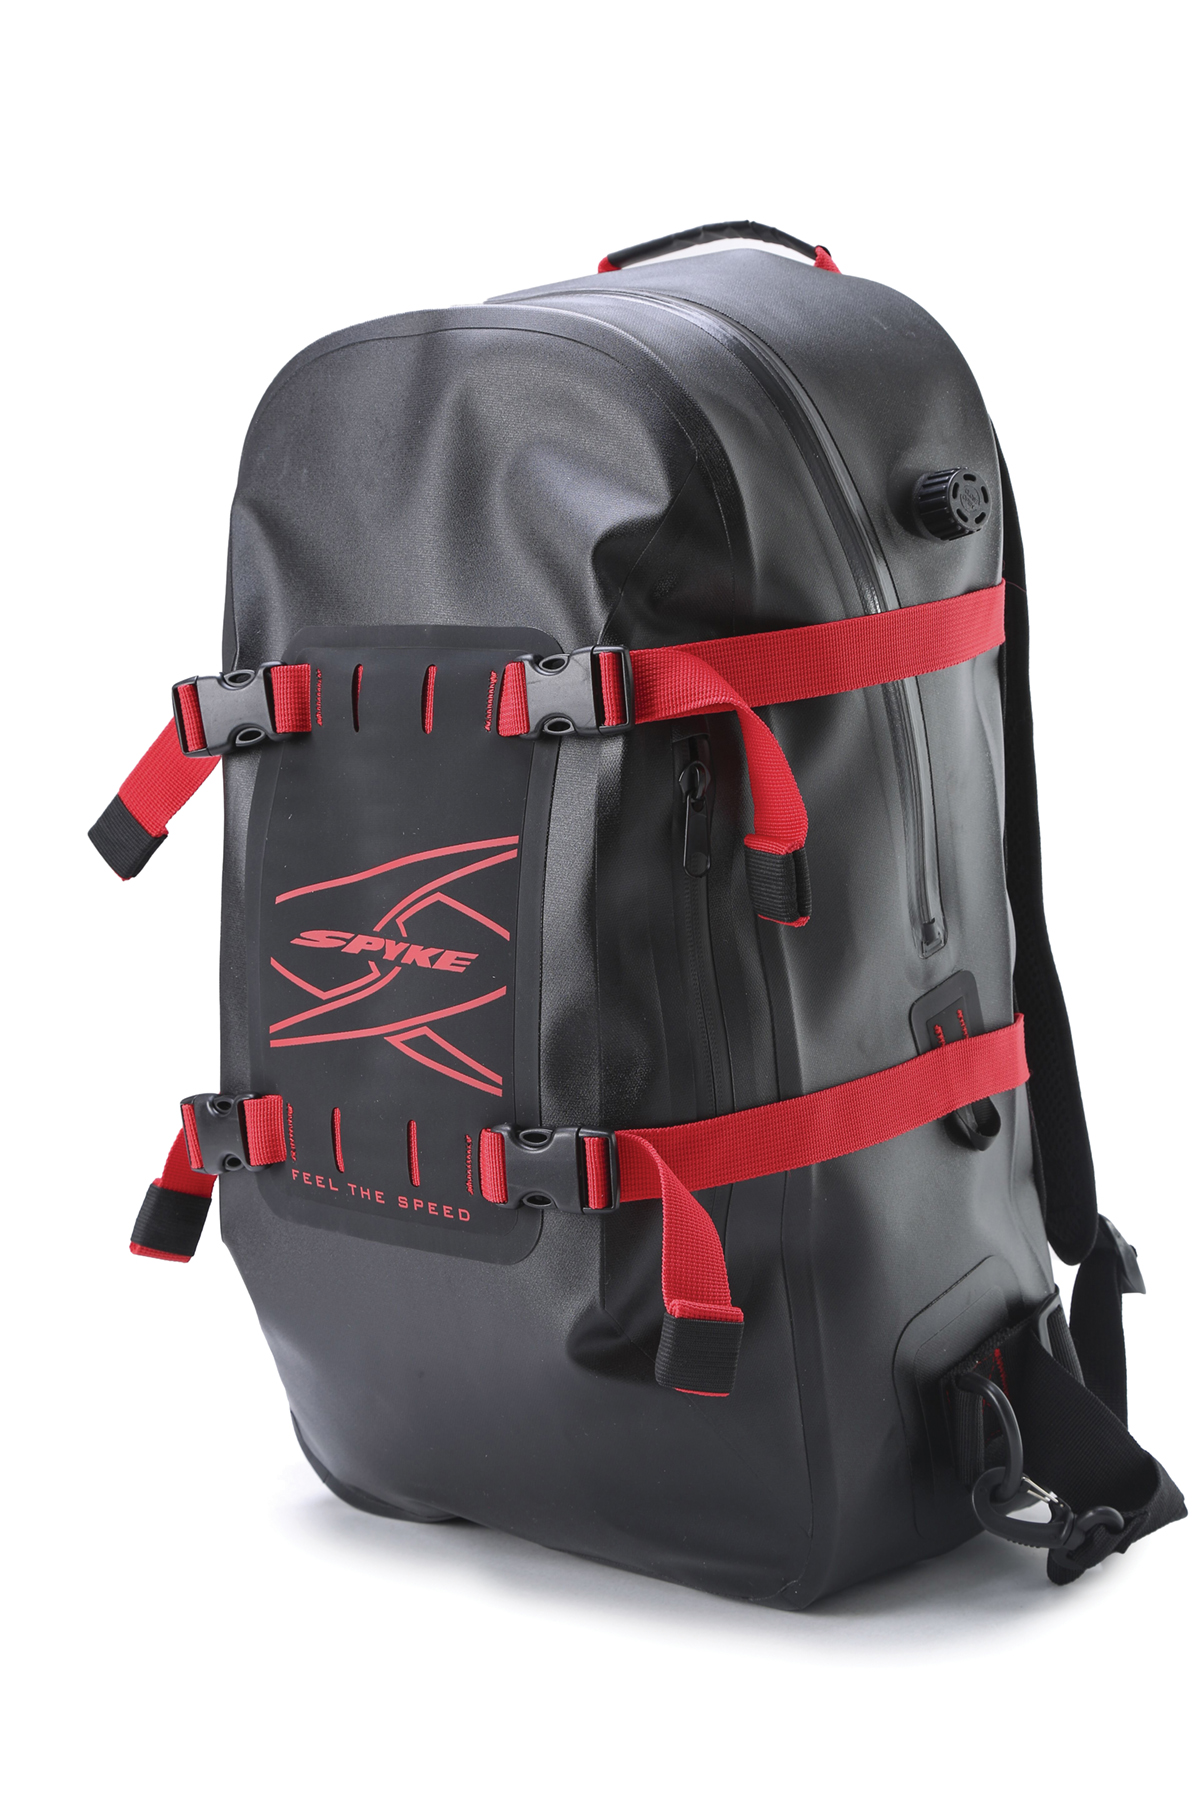 AQUA backpack – a perfect companion for your motorcycle season